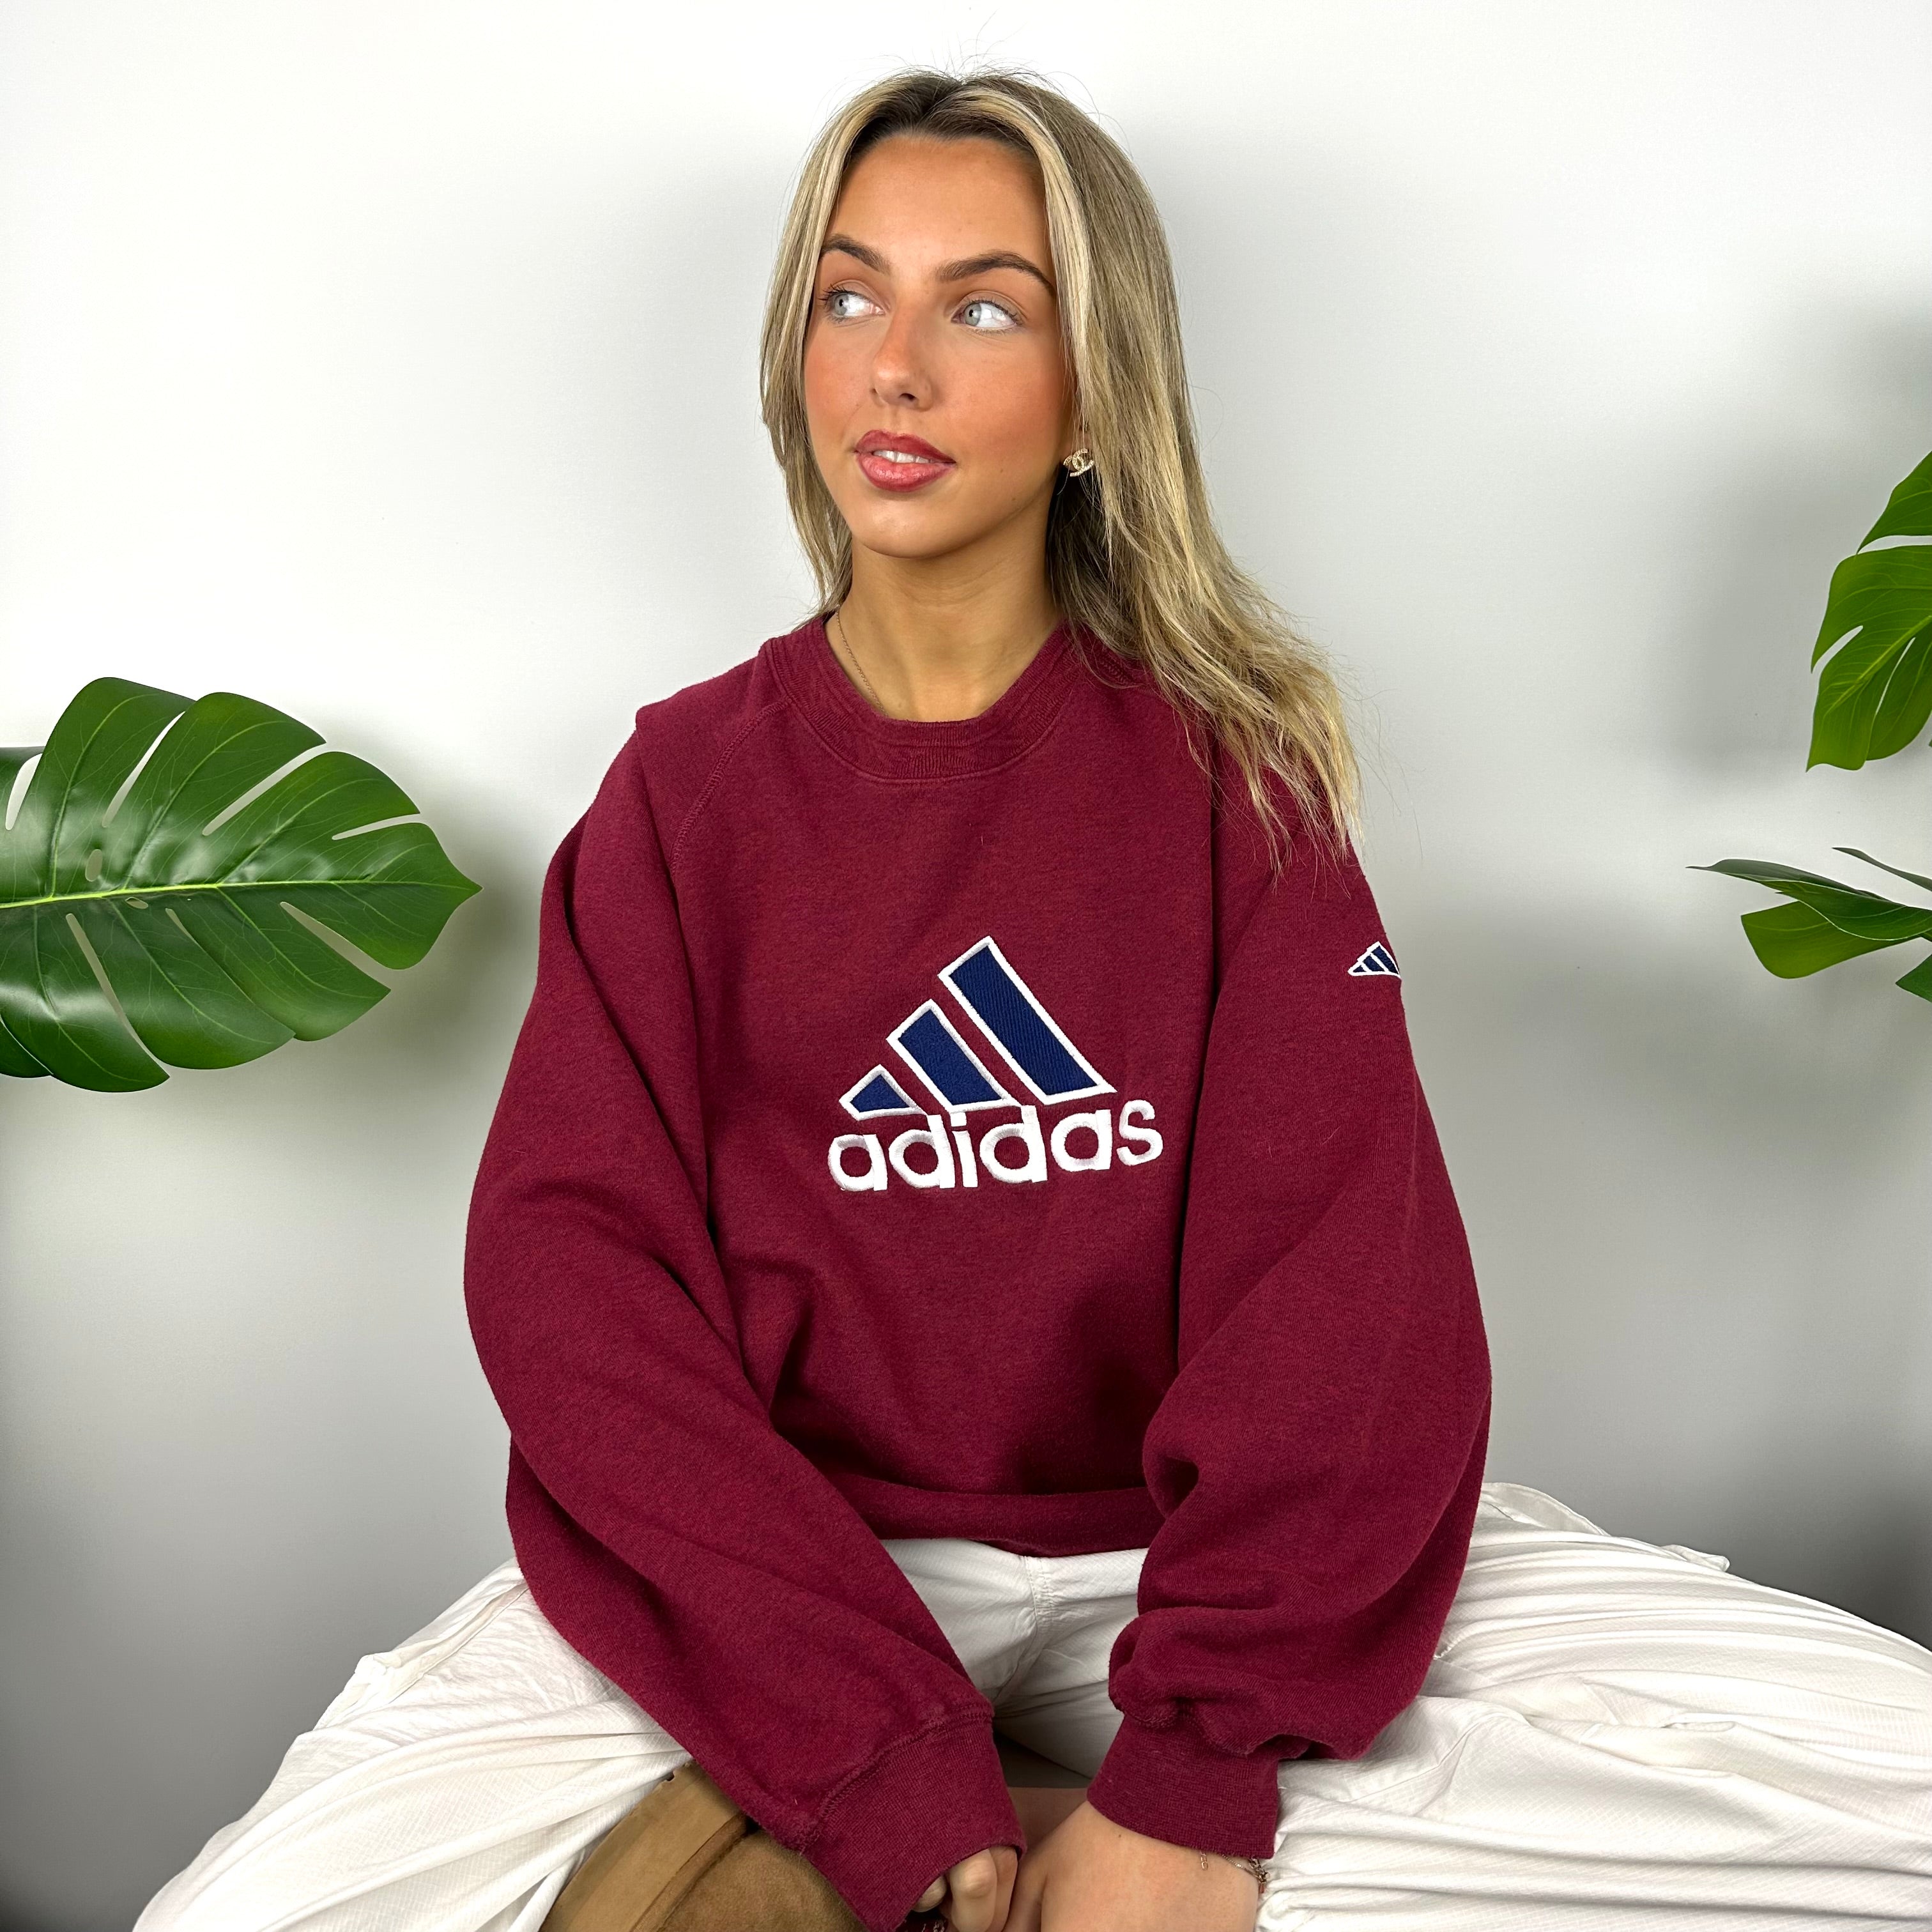 Adidas Maroon Embroidered Spell Out Sweatshirt (L)